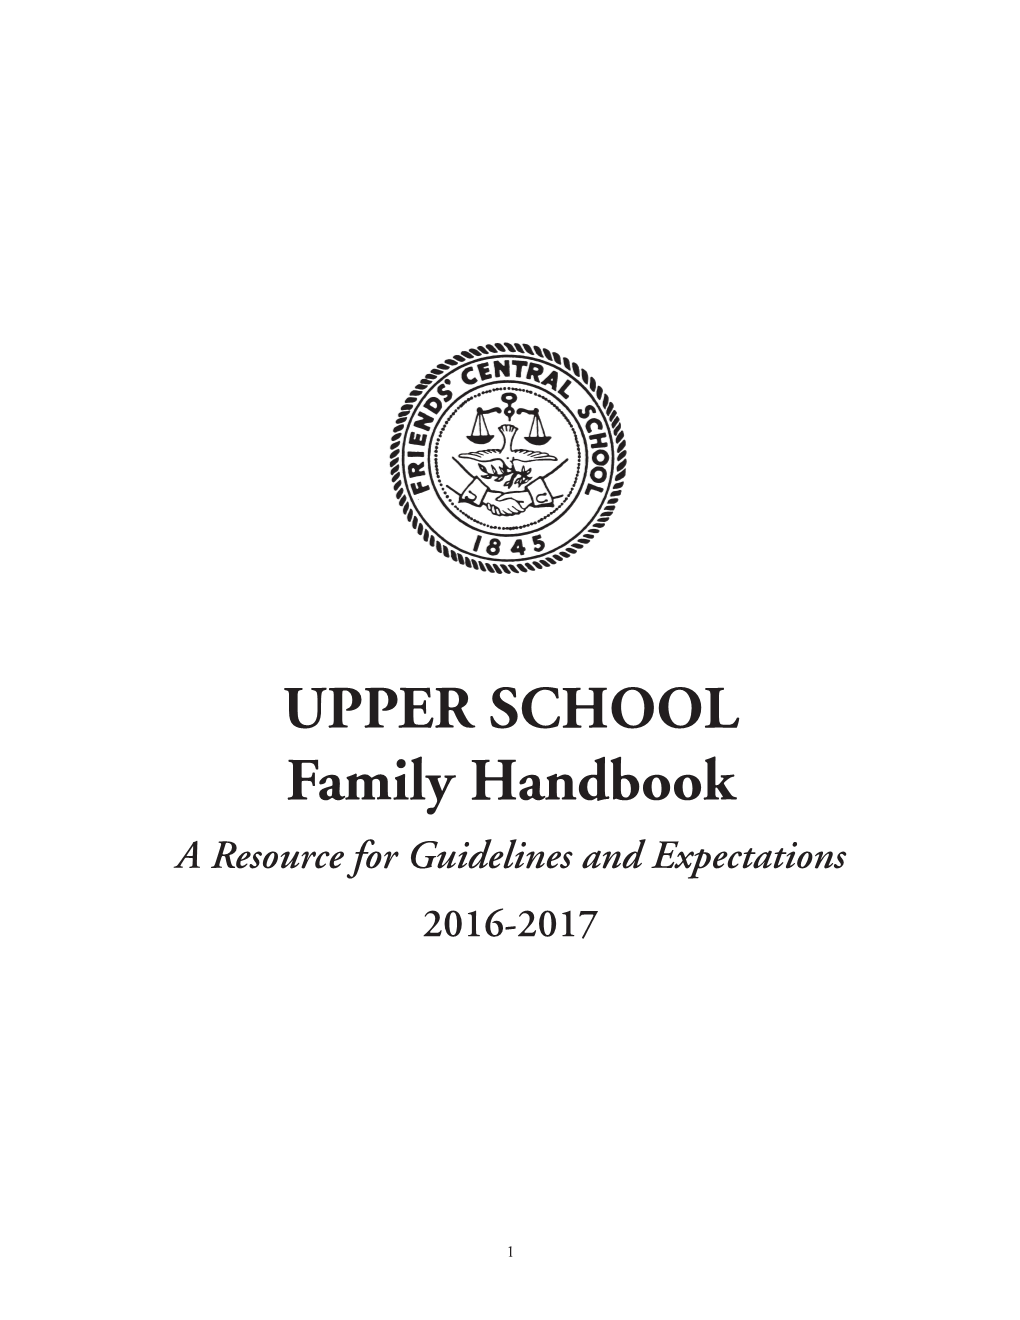 UPPER SCHOOL Family Handbook a Resource for Guidelines and Expectations 2016-2017